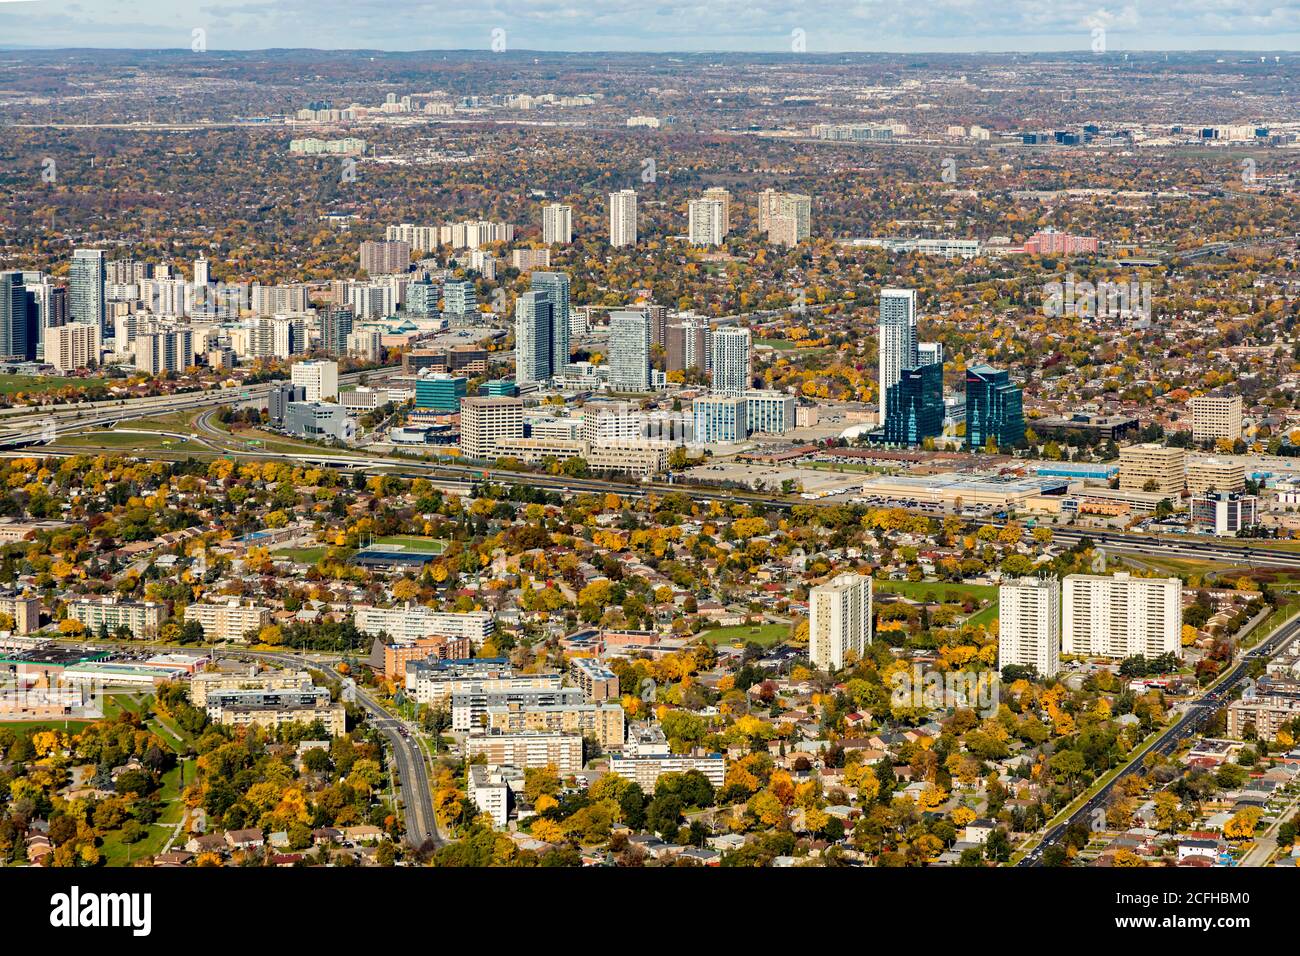 An aeial view at highways 401 and 404 showing Consumers Road commercial area in Toronto Canada. Stock Photo